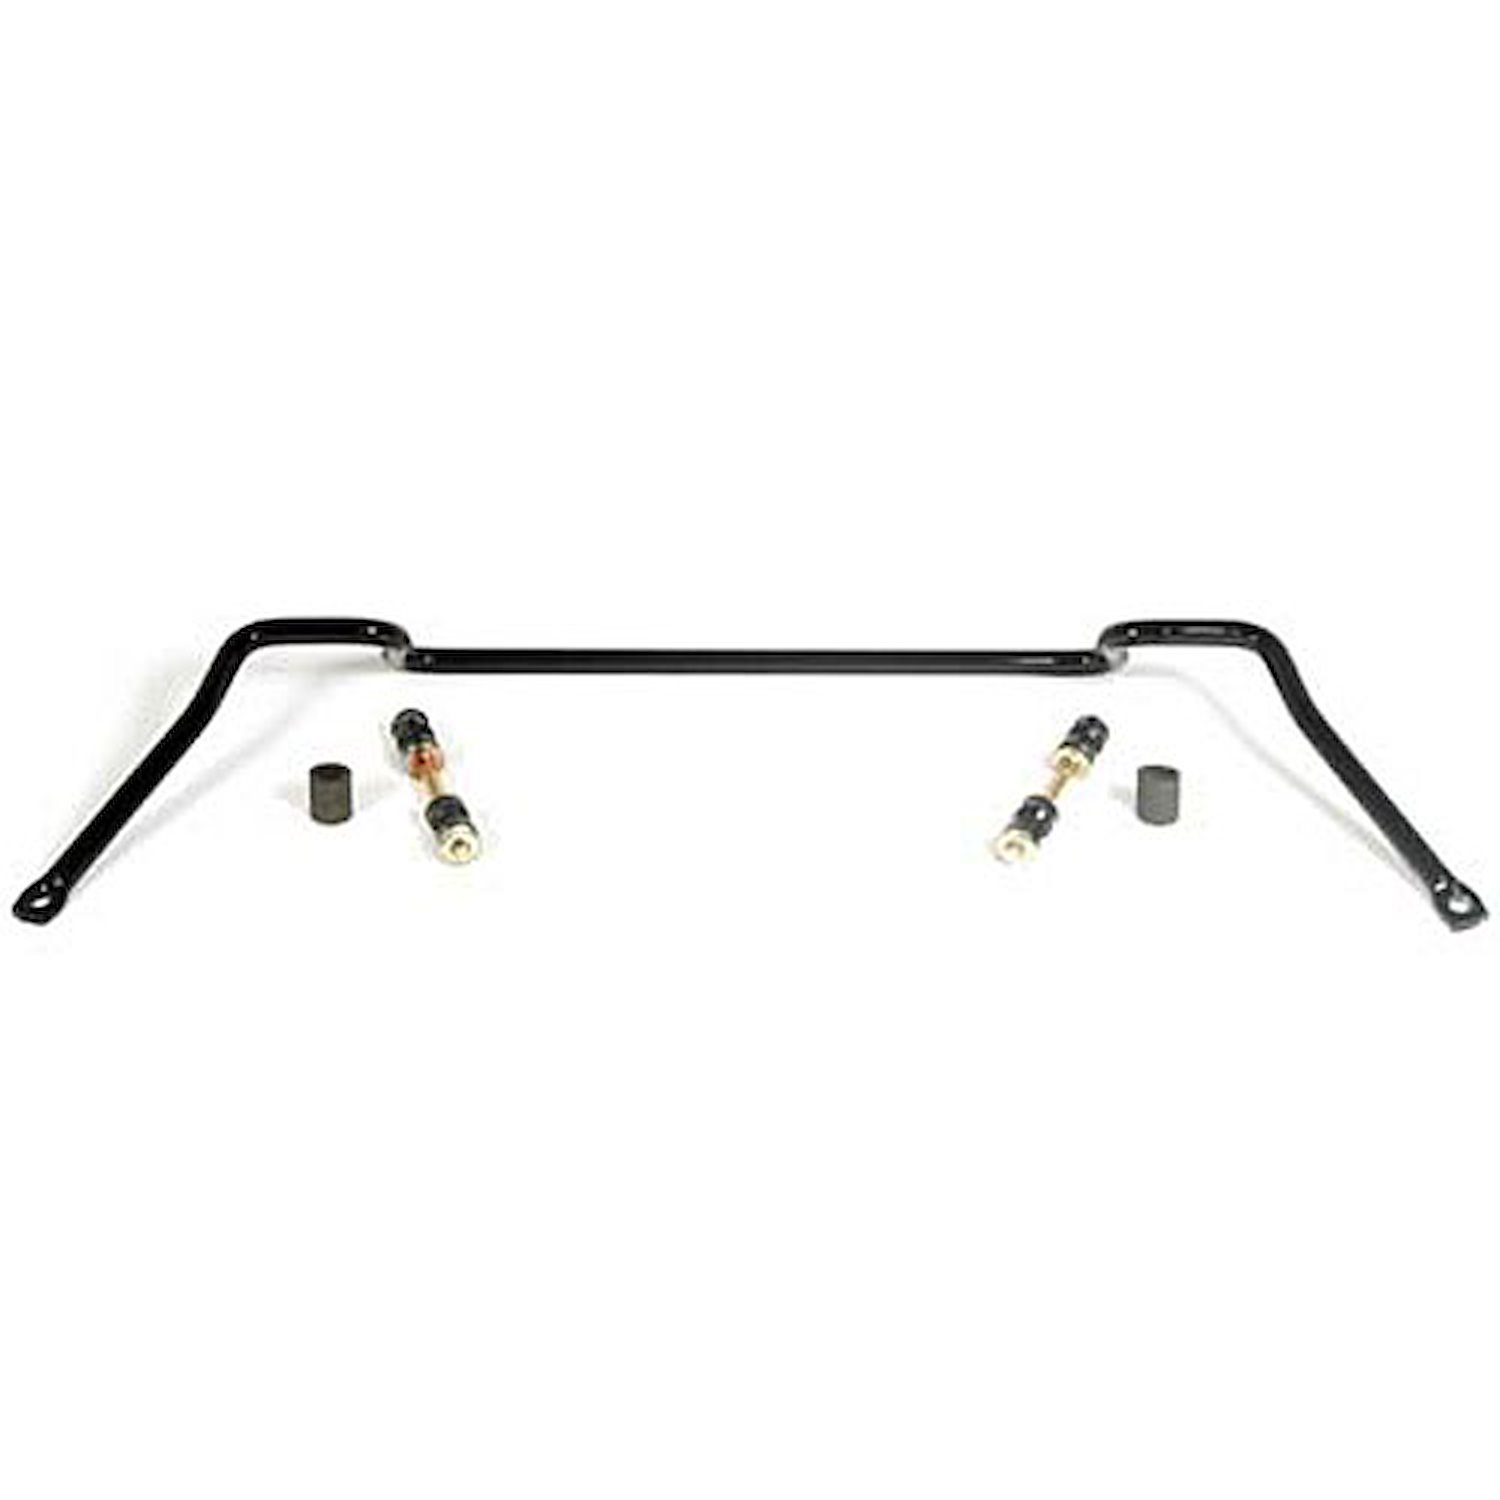 7/8" Front Sway Bar 1967-73 Comma